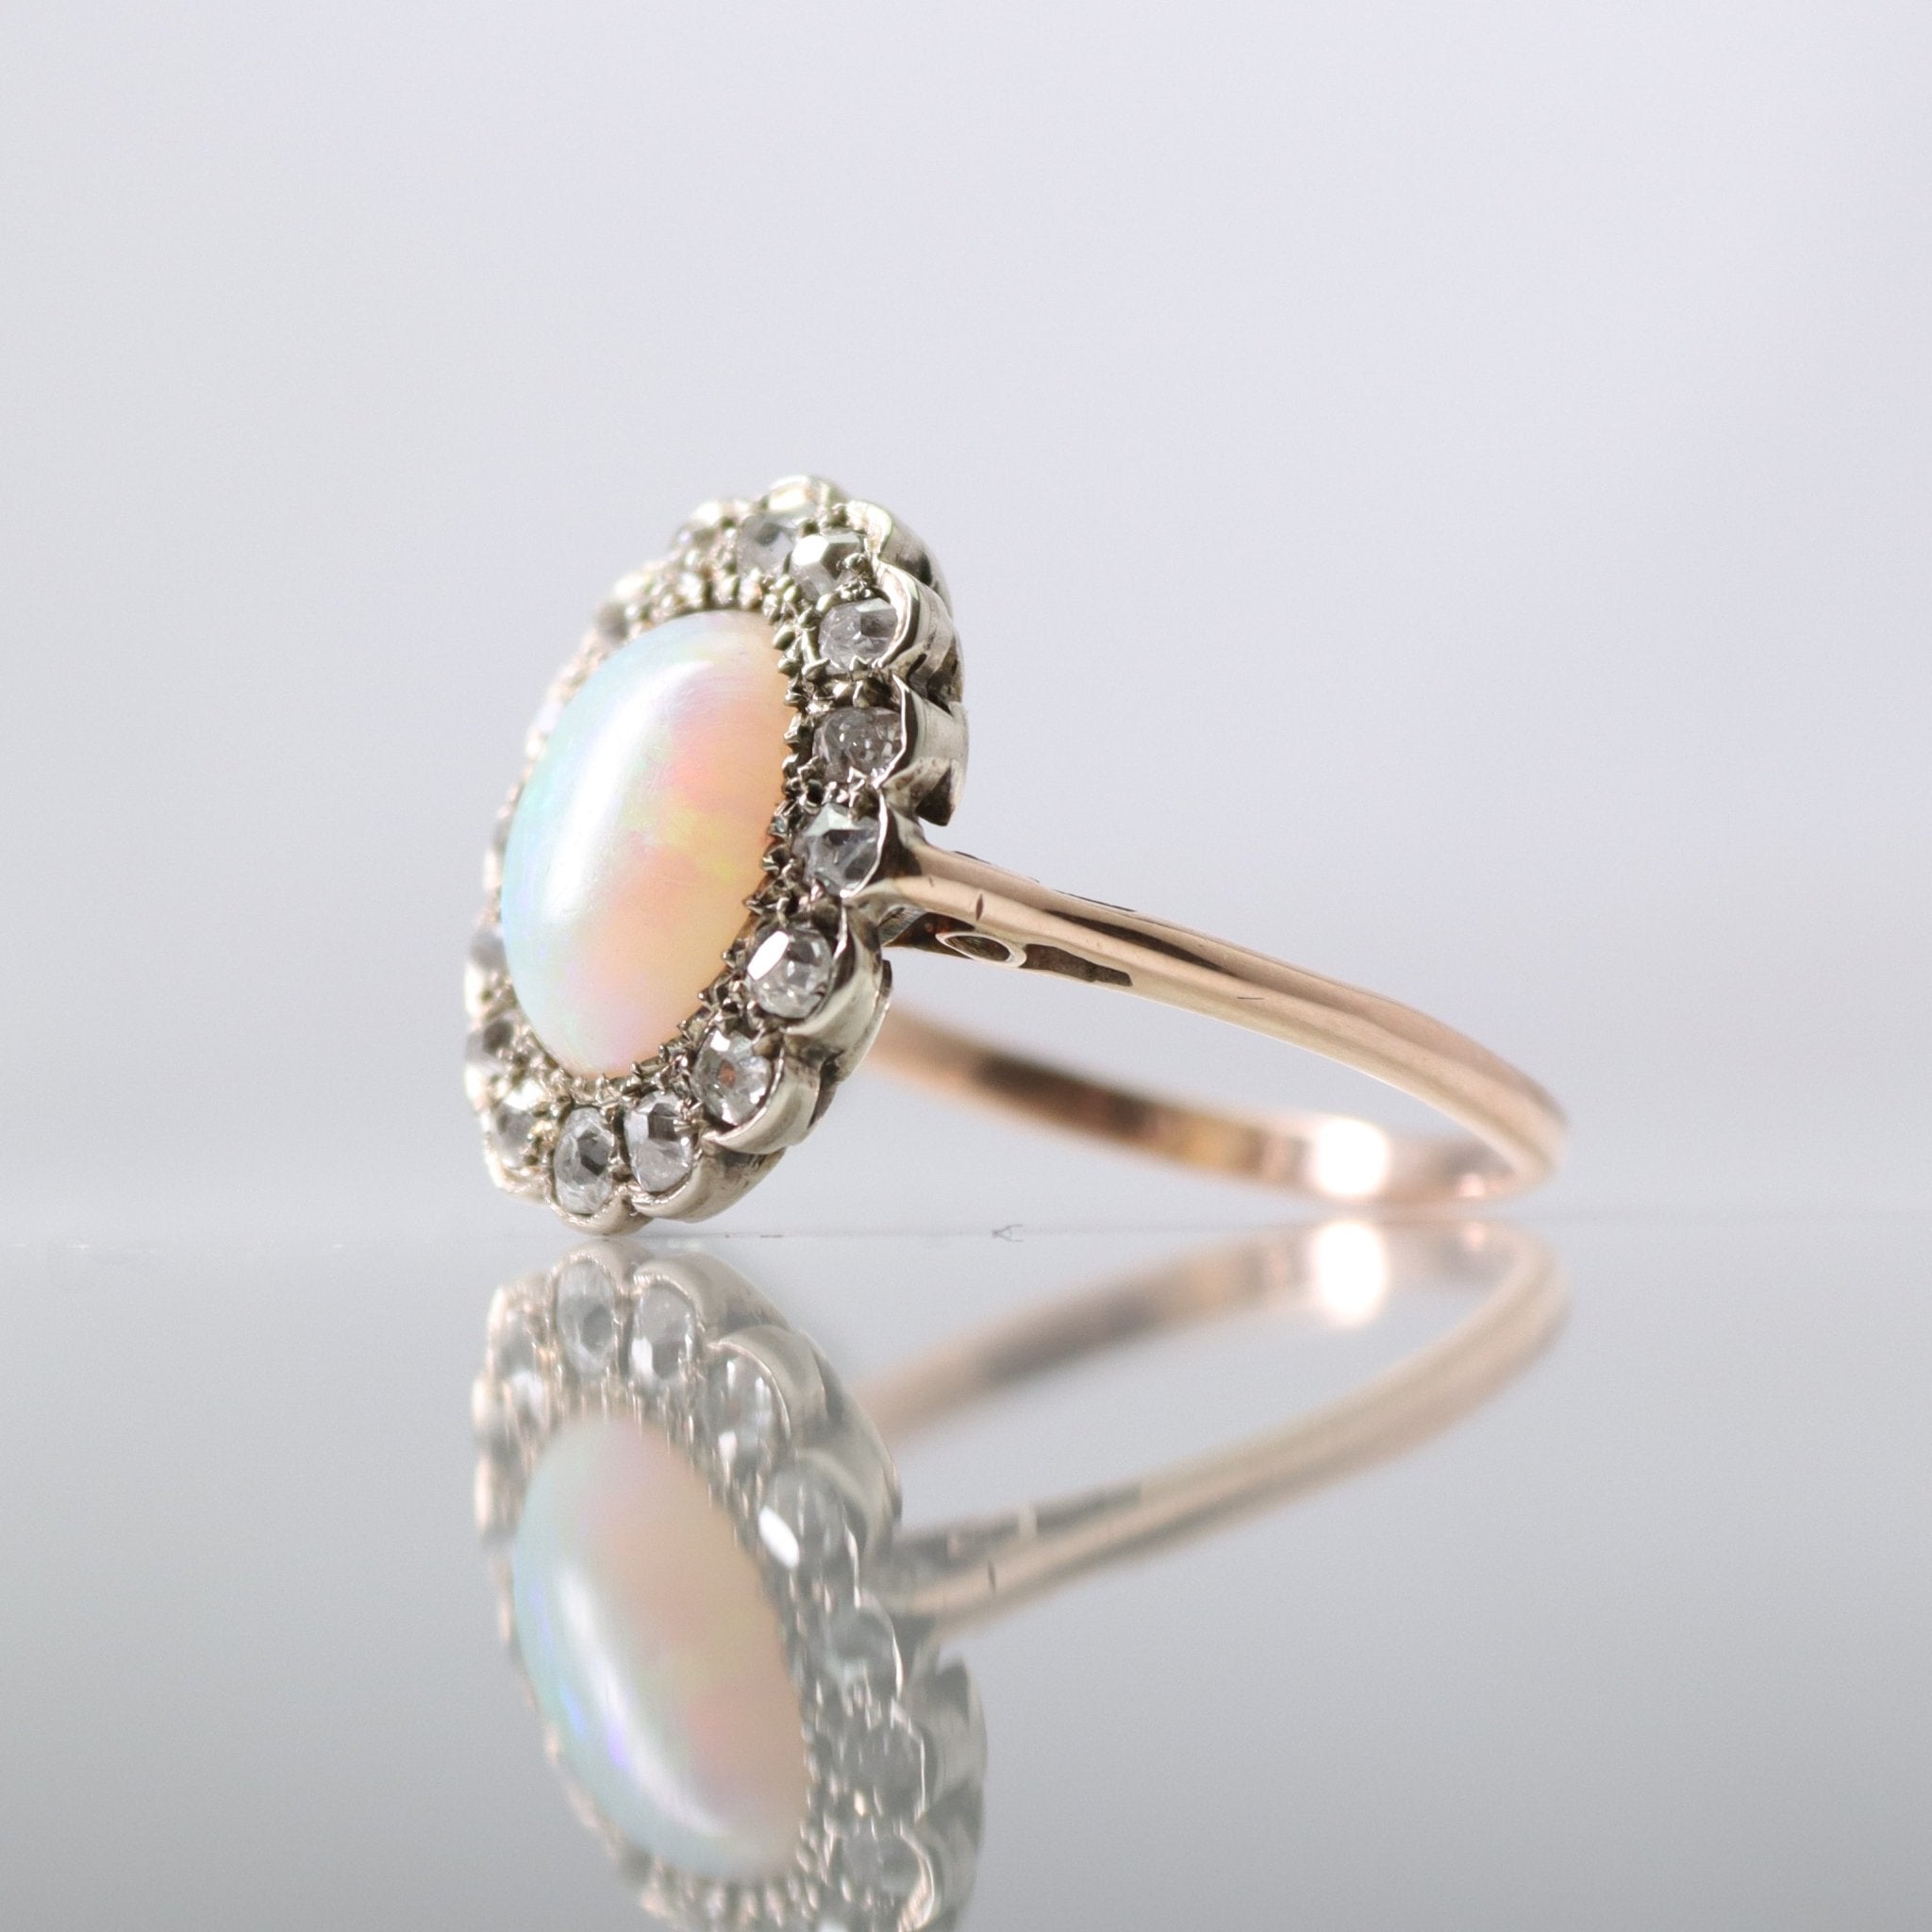 Victorian/Edwardian Opal and Diamond Halo Ring